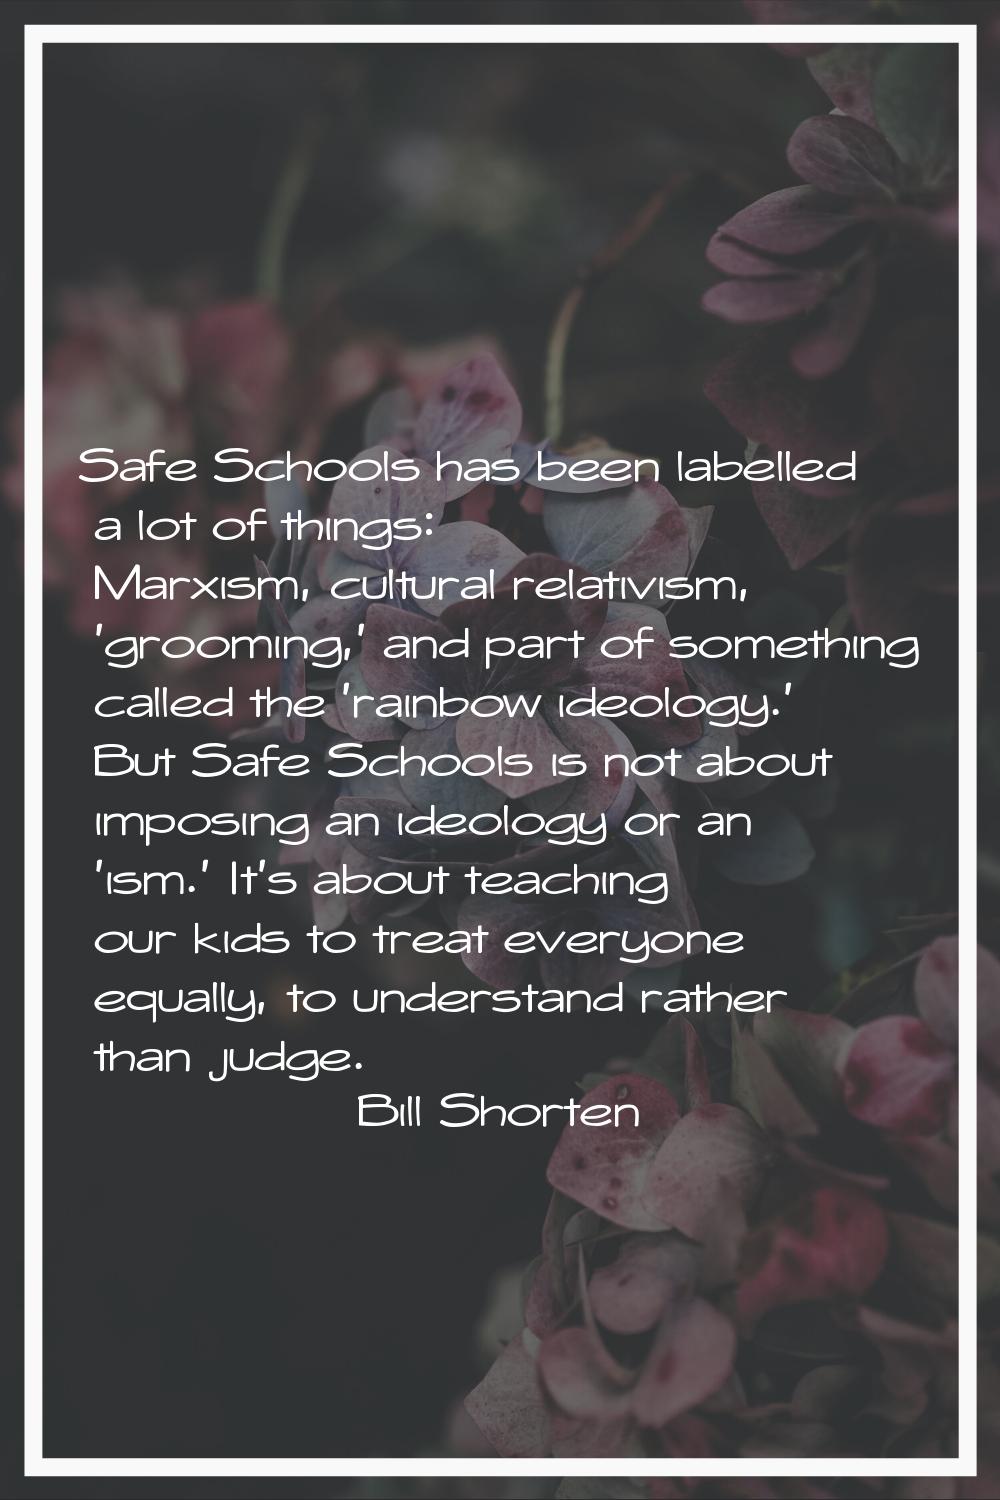 Safe Schools has been labelled a lot of things: Marxism, cultural relativism, 'grooming,' and part 